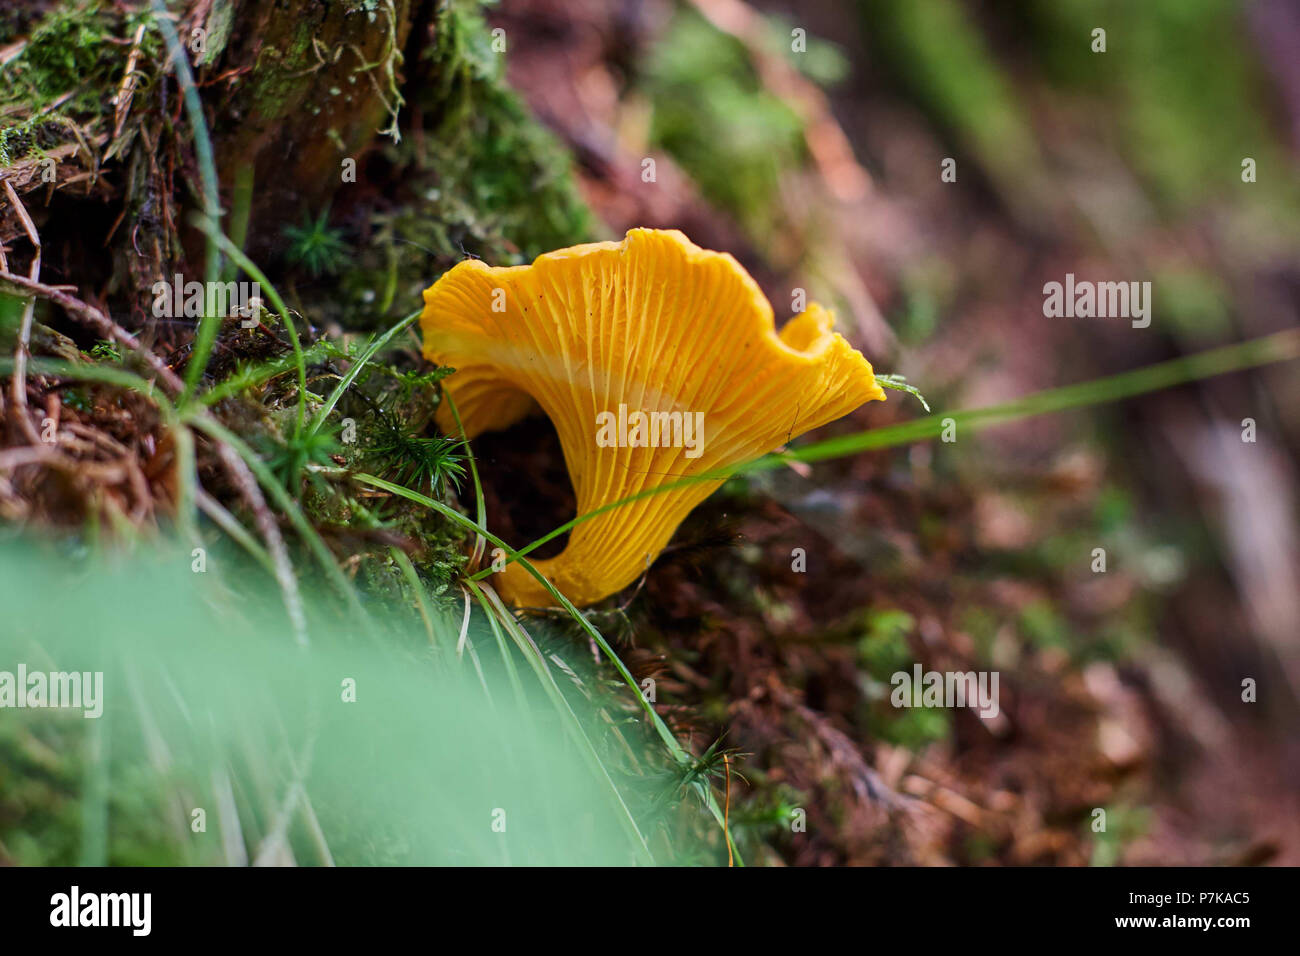 Chanterelle growing in the mossy forest soil Stock Photo